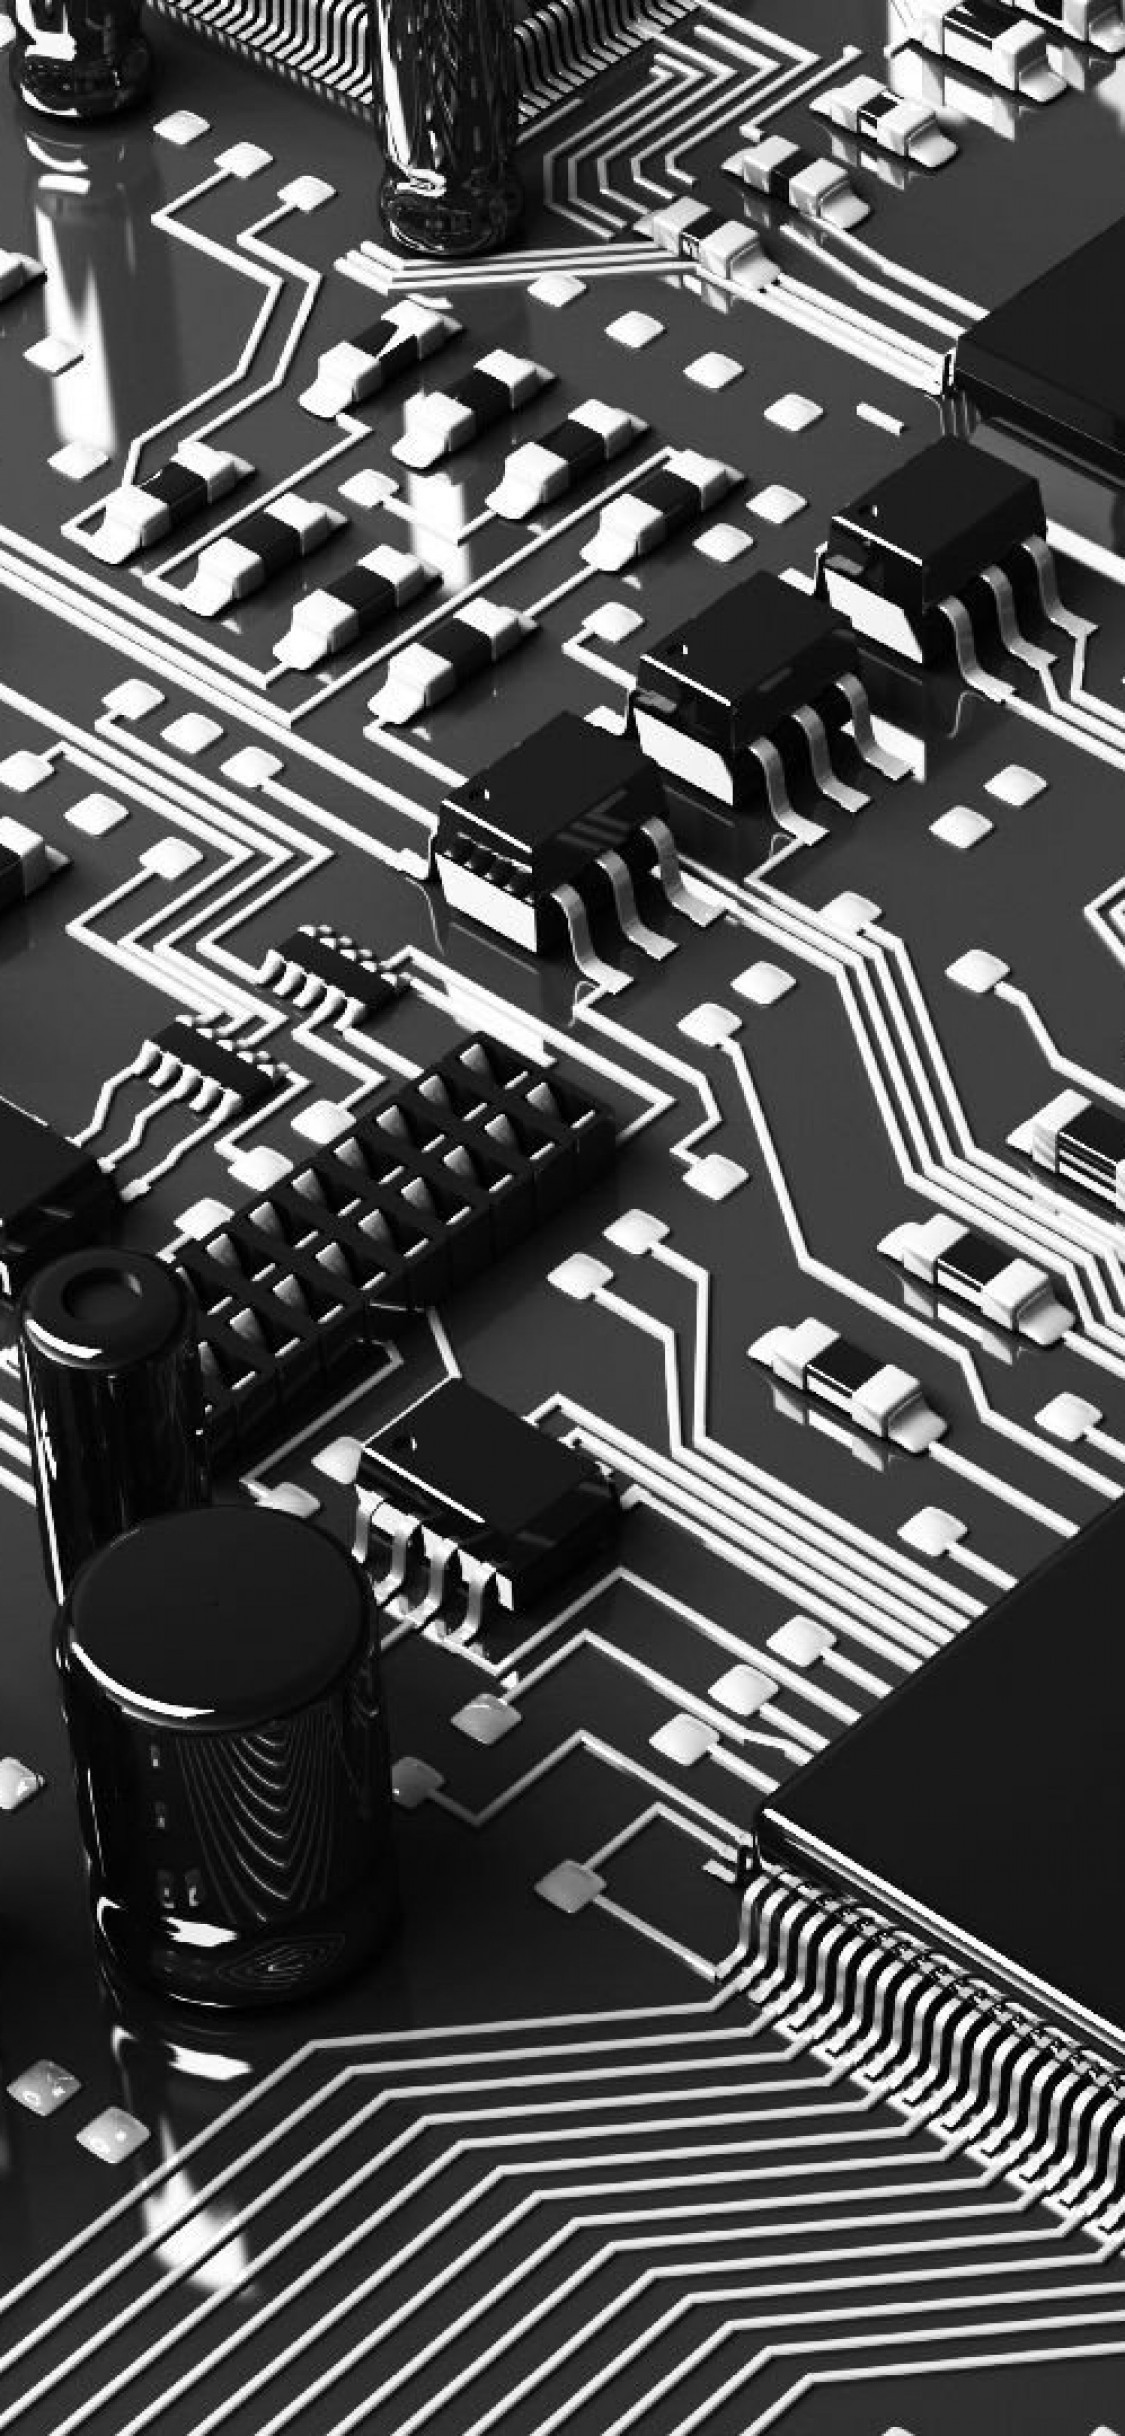 Download 1125x2436 Motherboard, Black And White Wallpaper for iPhone 11 Pro & X